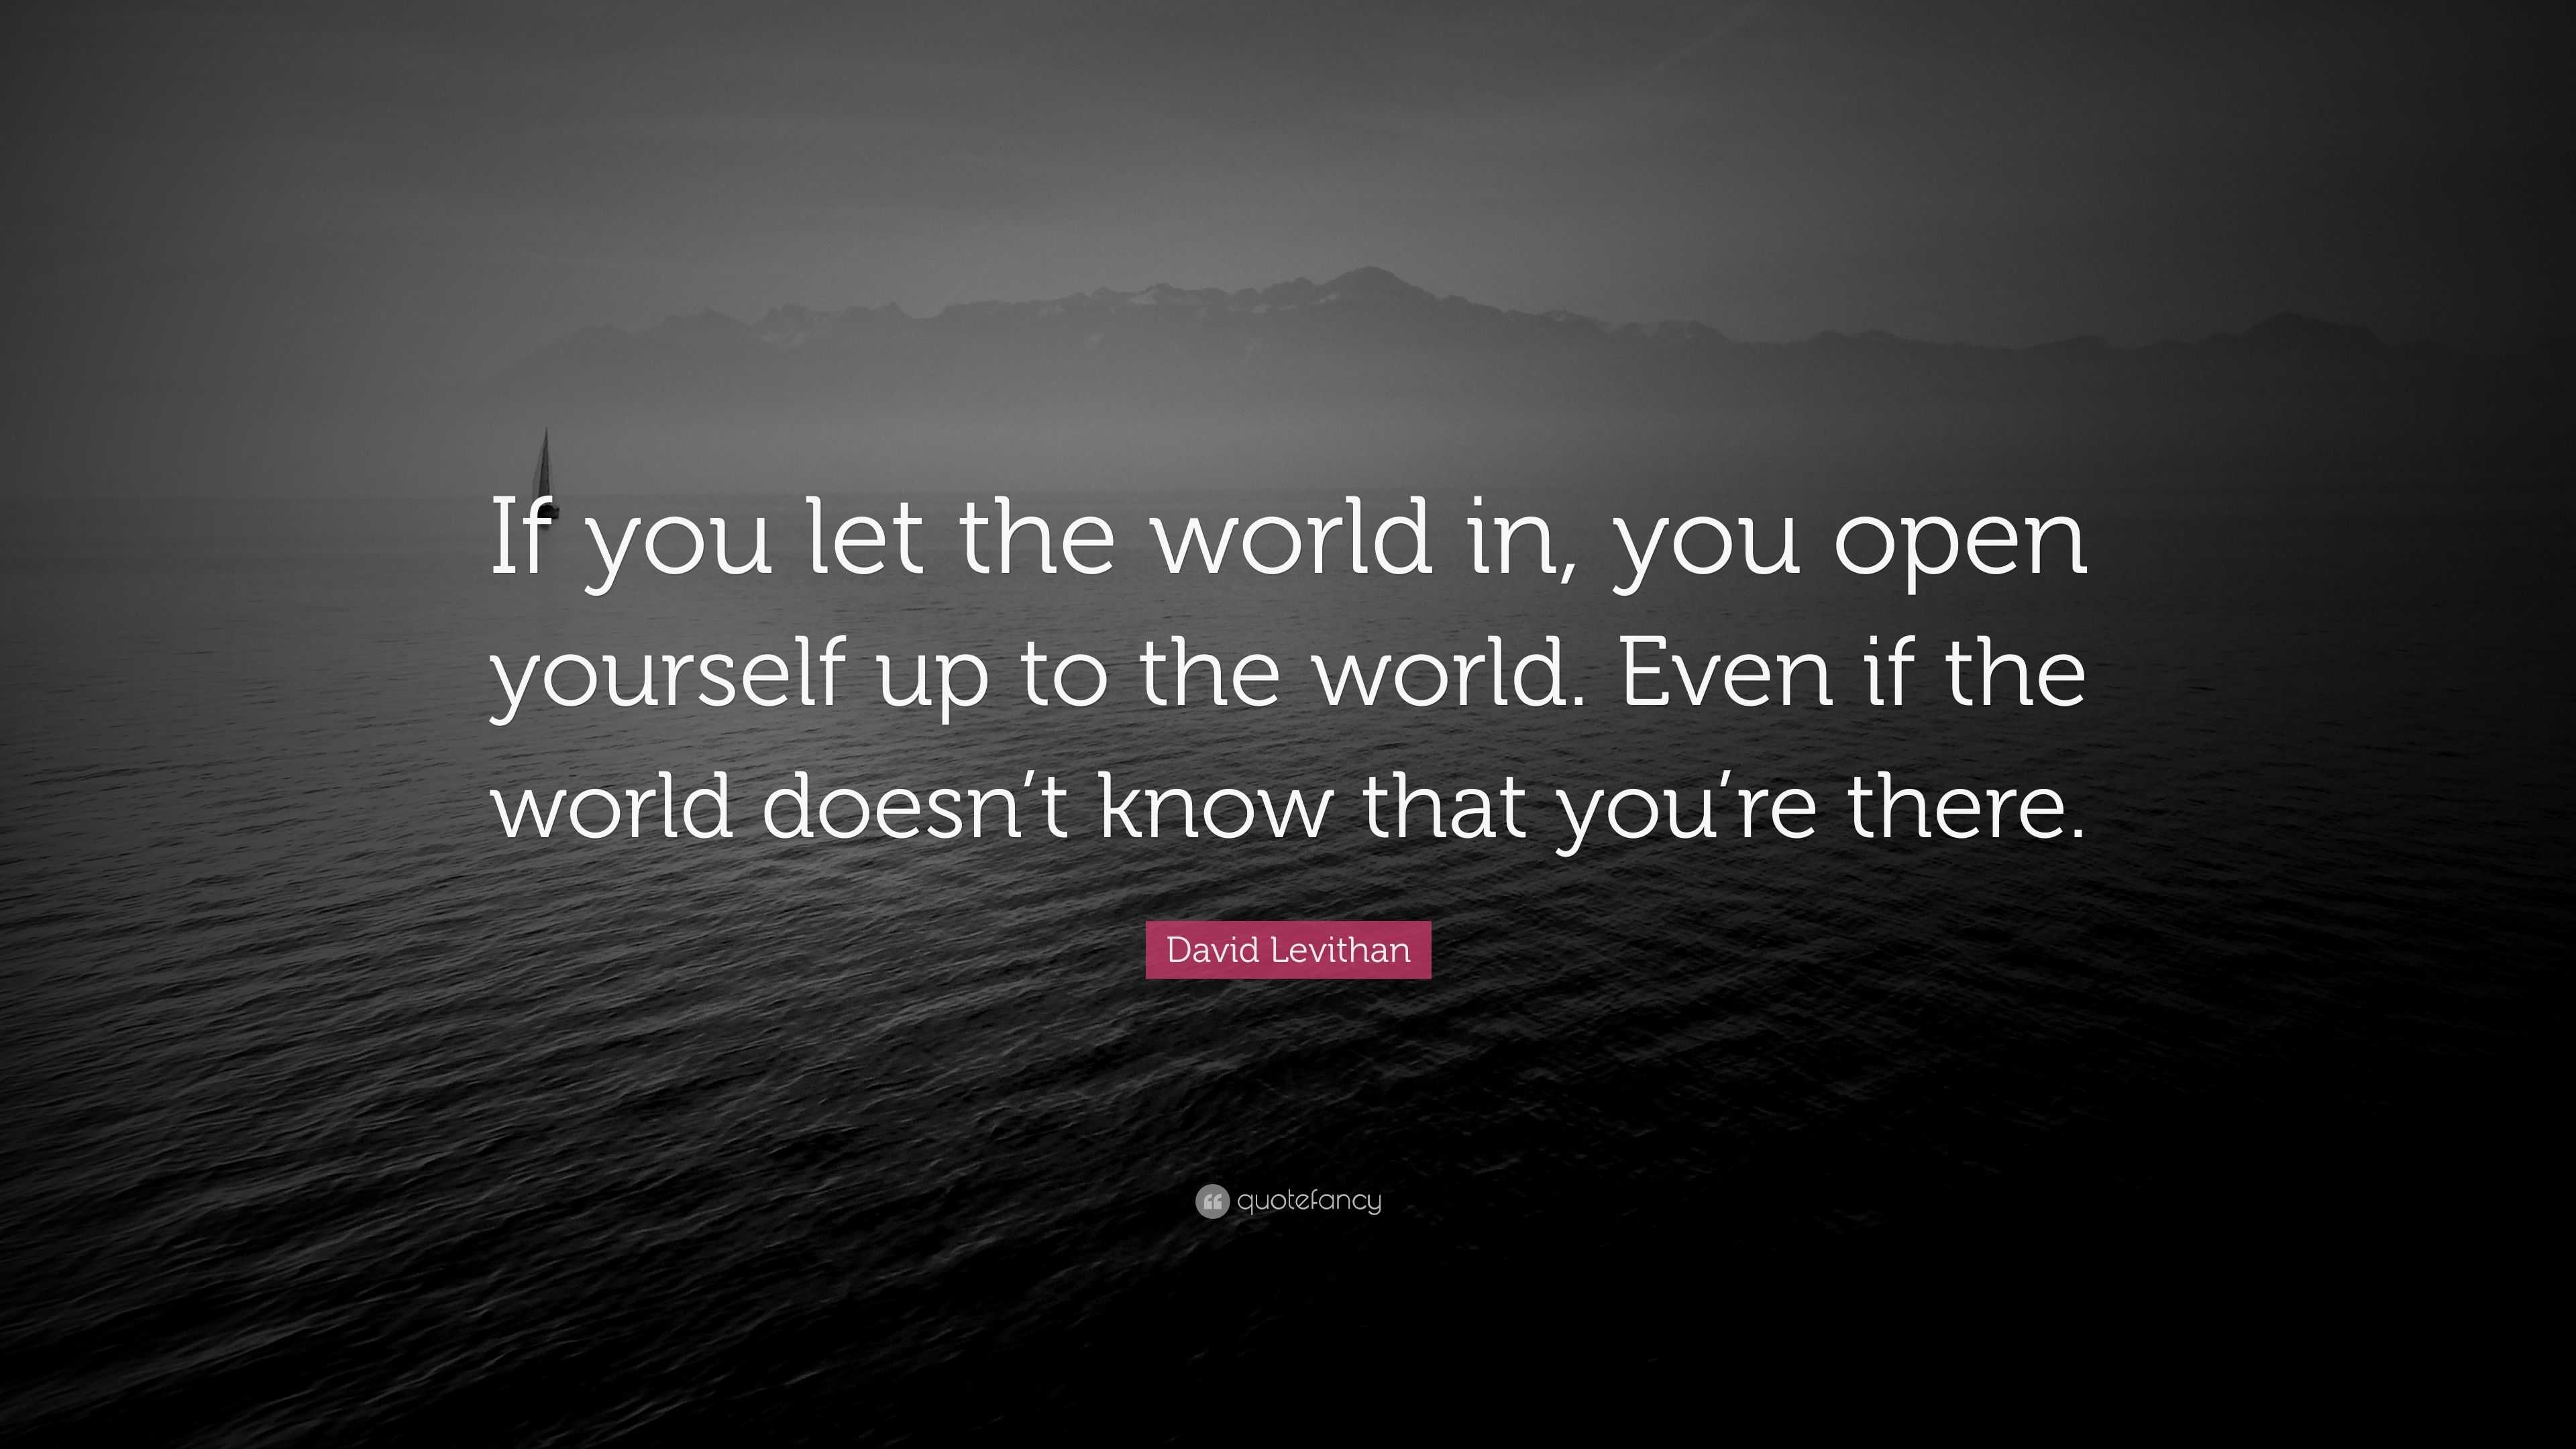 David Levithan Quote: “If you let the world in, you open yourself up to